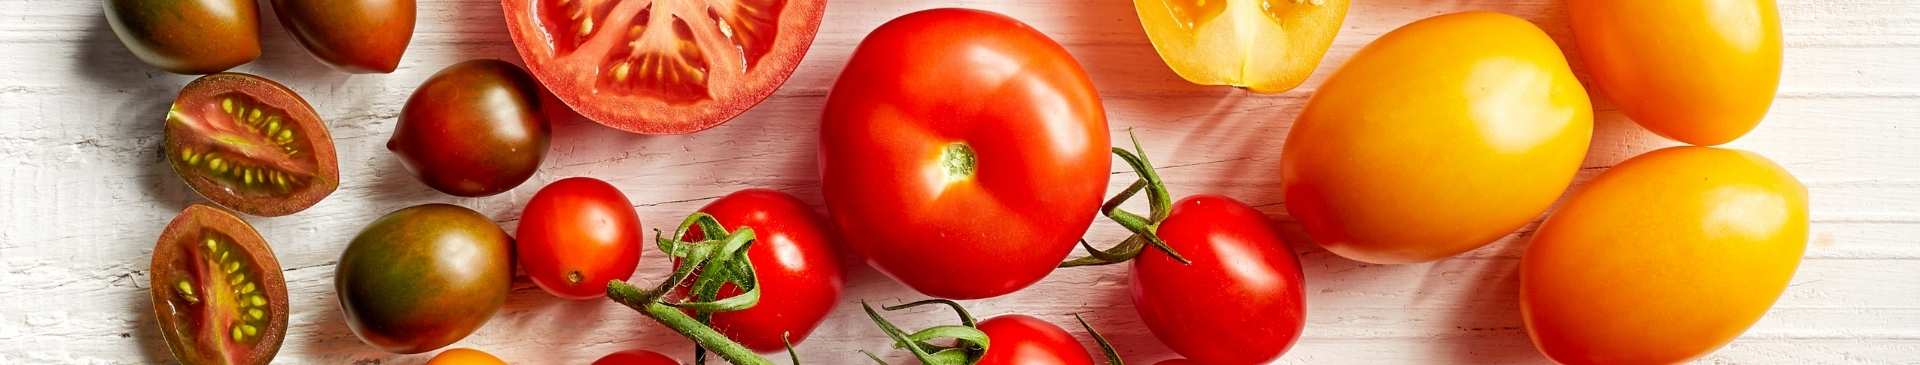 Tomato- How to grow from seed